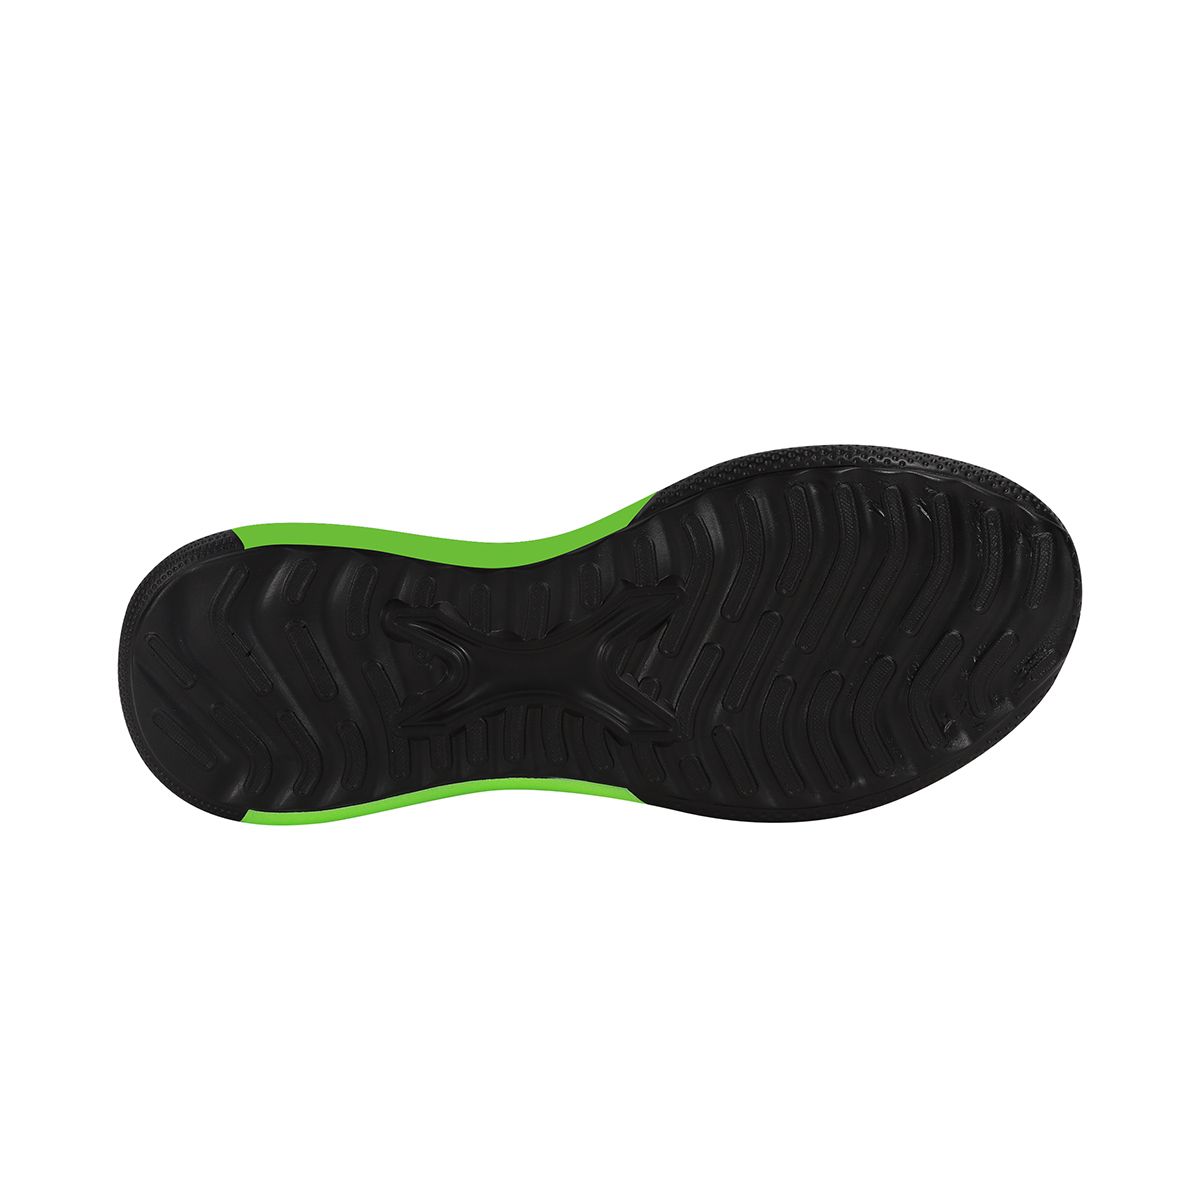 Neon Safety Shoes Green Shock S3 High